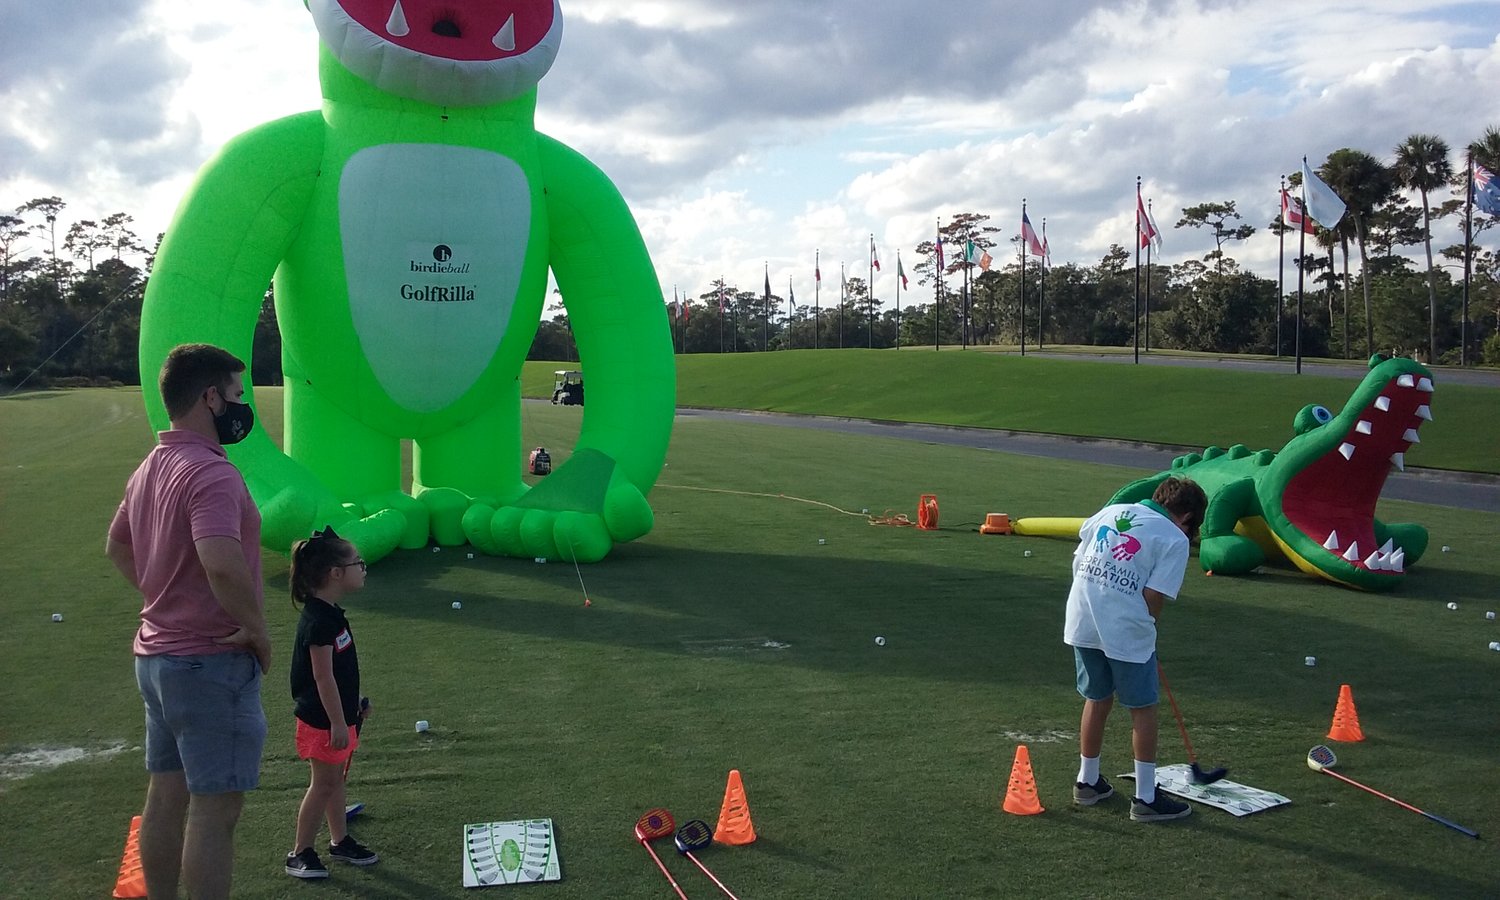 Young golfers went up against a large inflatable gorilla during the All-Star Kids Clinic.